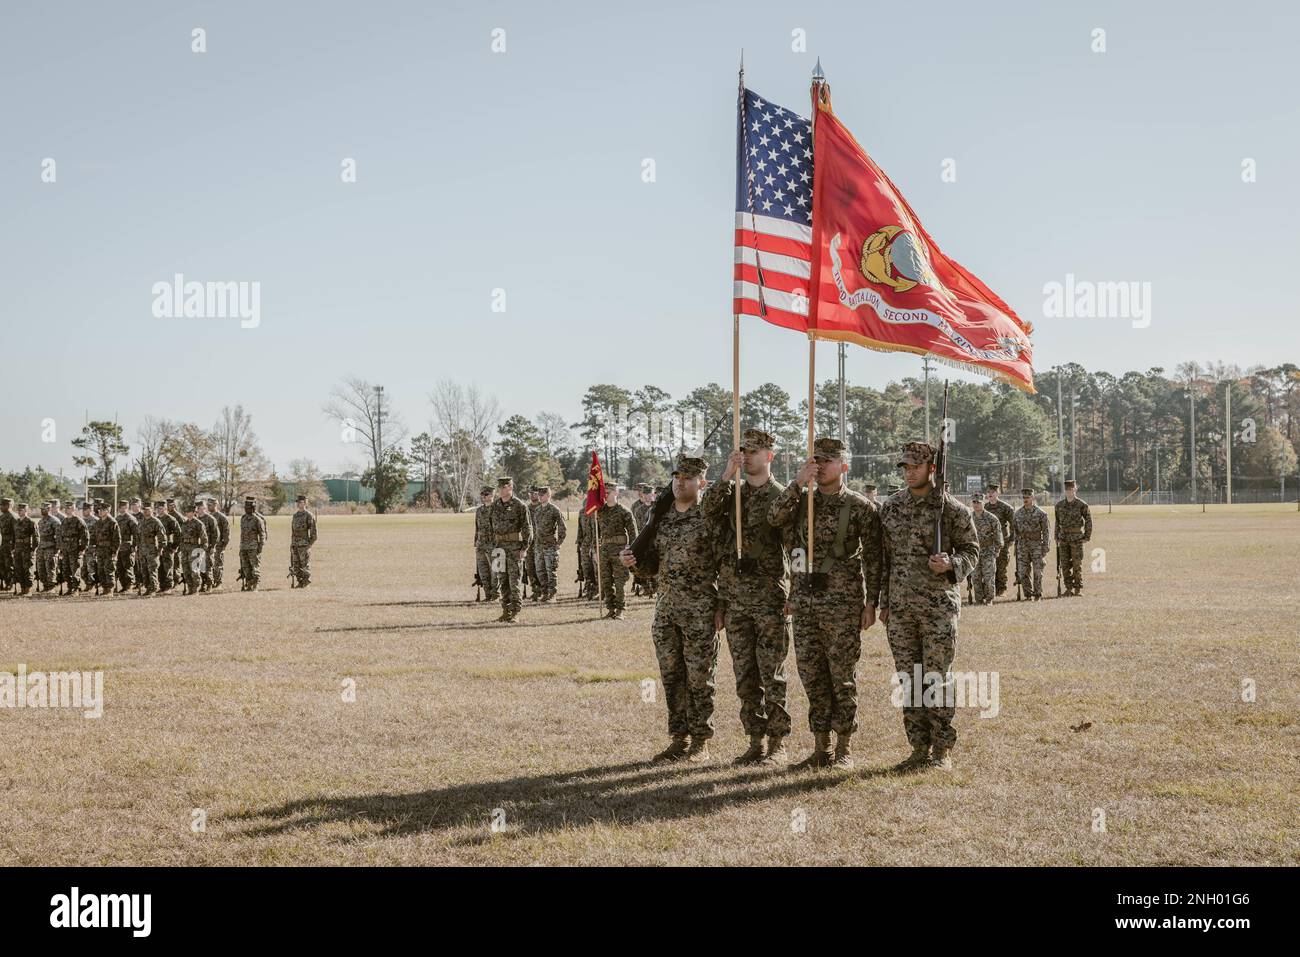 A U.S. Marine Corps color guard with 3rd Battalion, 2d Marine Regiment, 2d Marine Division, marches the regimental colors at a change of command ceremony on Camp Lejeune, North Carolina, Dec. 2, 2022. During the ceremony, Lt. Col. Charles C. Nash, the outgoing commander of 3/2, relinquished command to Lt. Col. John F. Campbell. Stock Photo